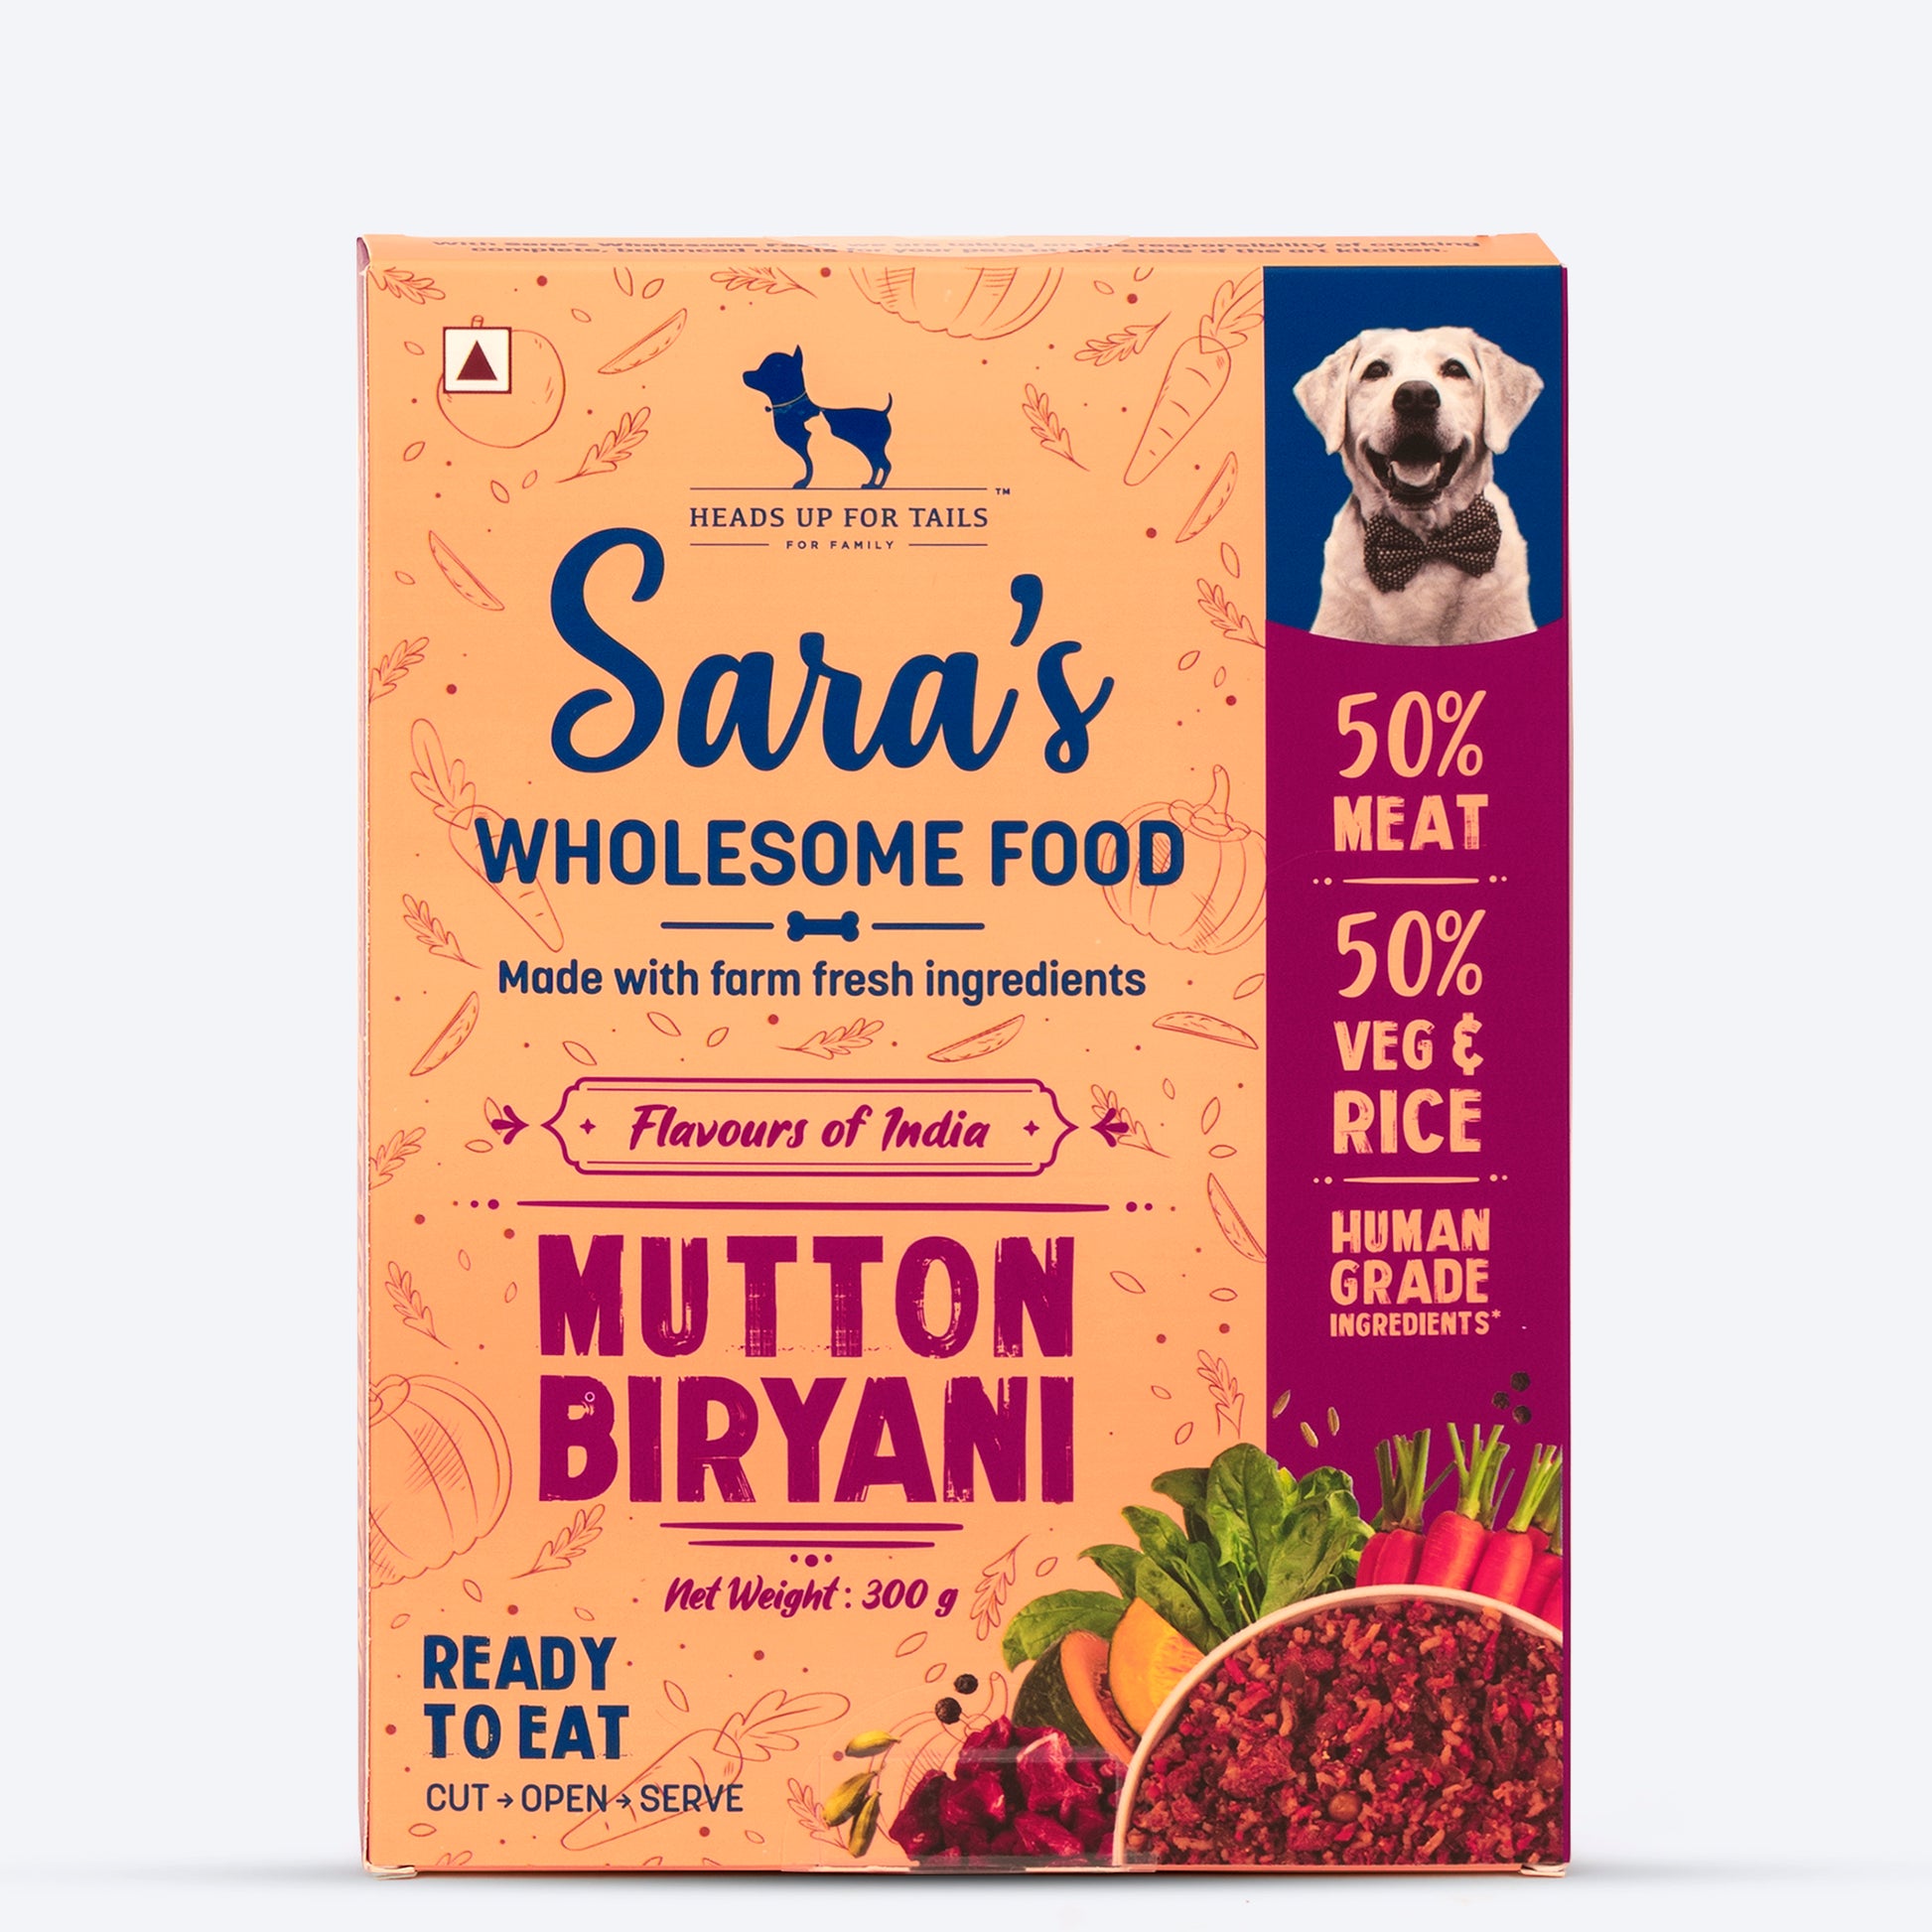 HUFT Sara’s Wholesome Food (Flavours of India) - Mutton Biryani (300 g) - Heads Up For Tails